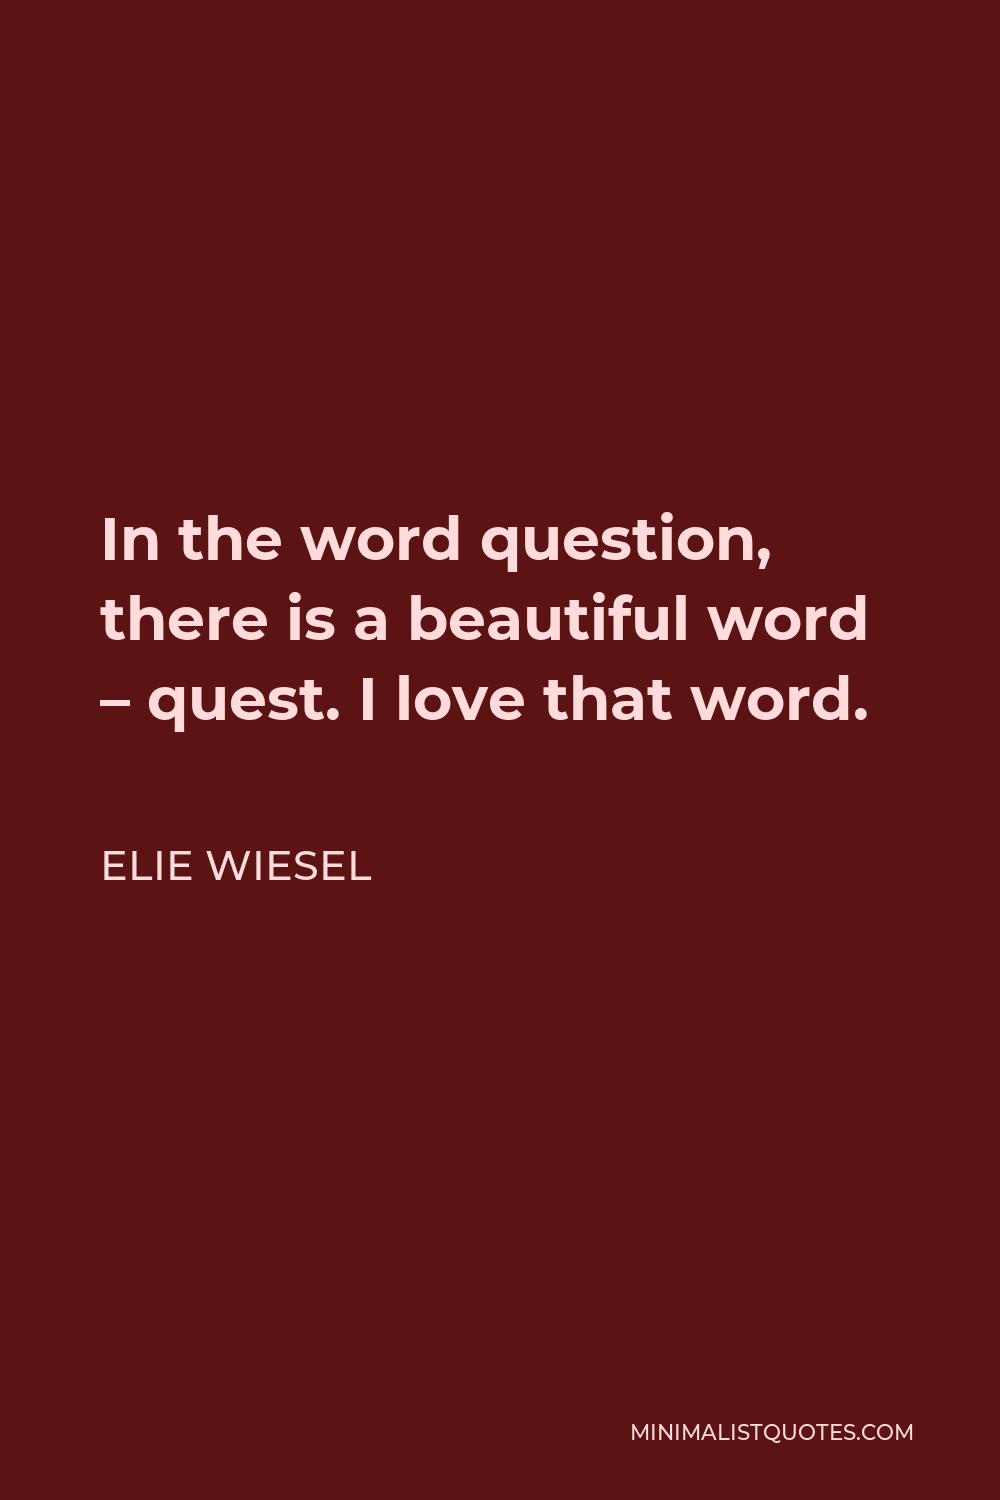 Elie Wiesel Quote - In the word question, there is a beautiful word – quest. I love that word.